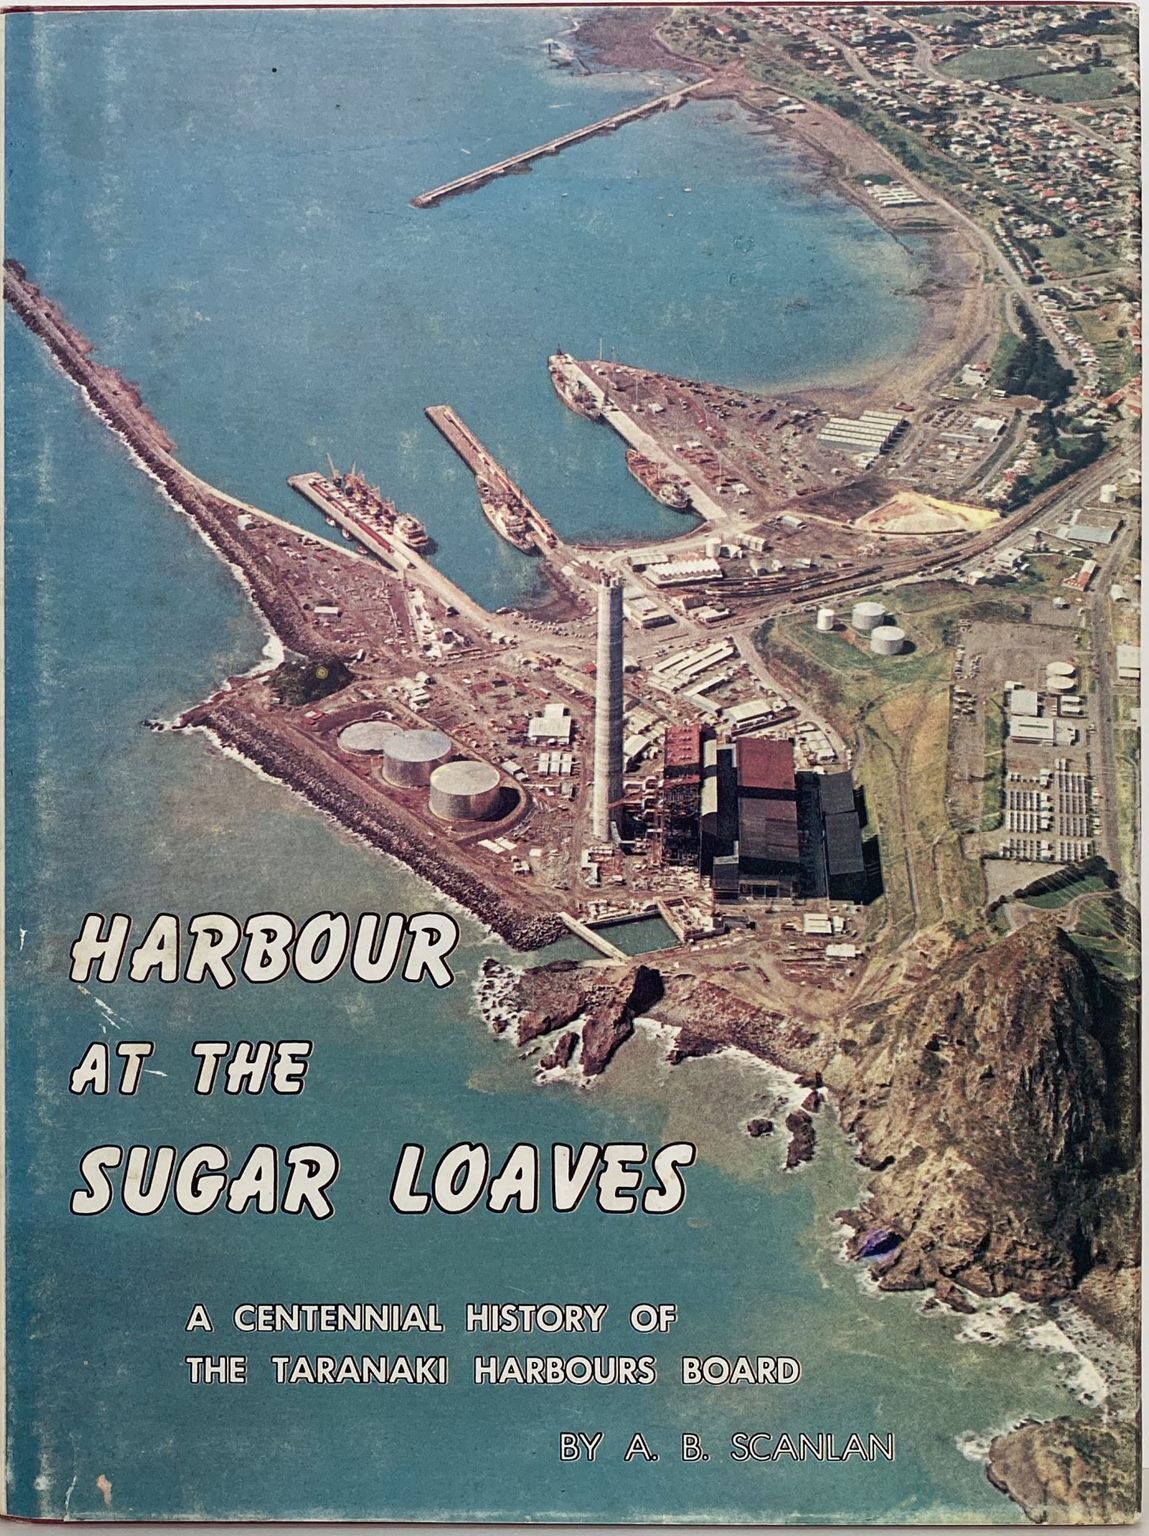 HARBOUR AT THE SUGAR LOAVES: History of The Taranaki Harbour